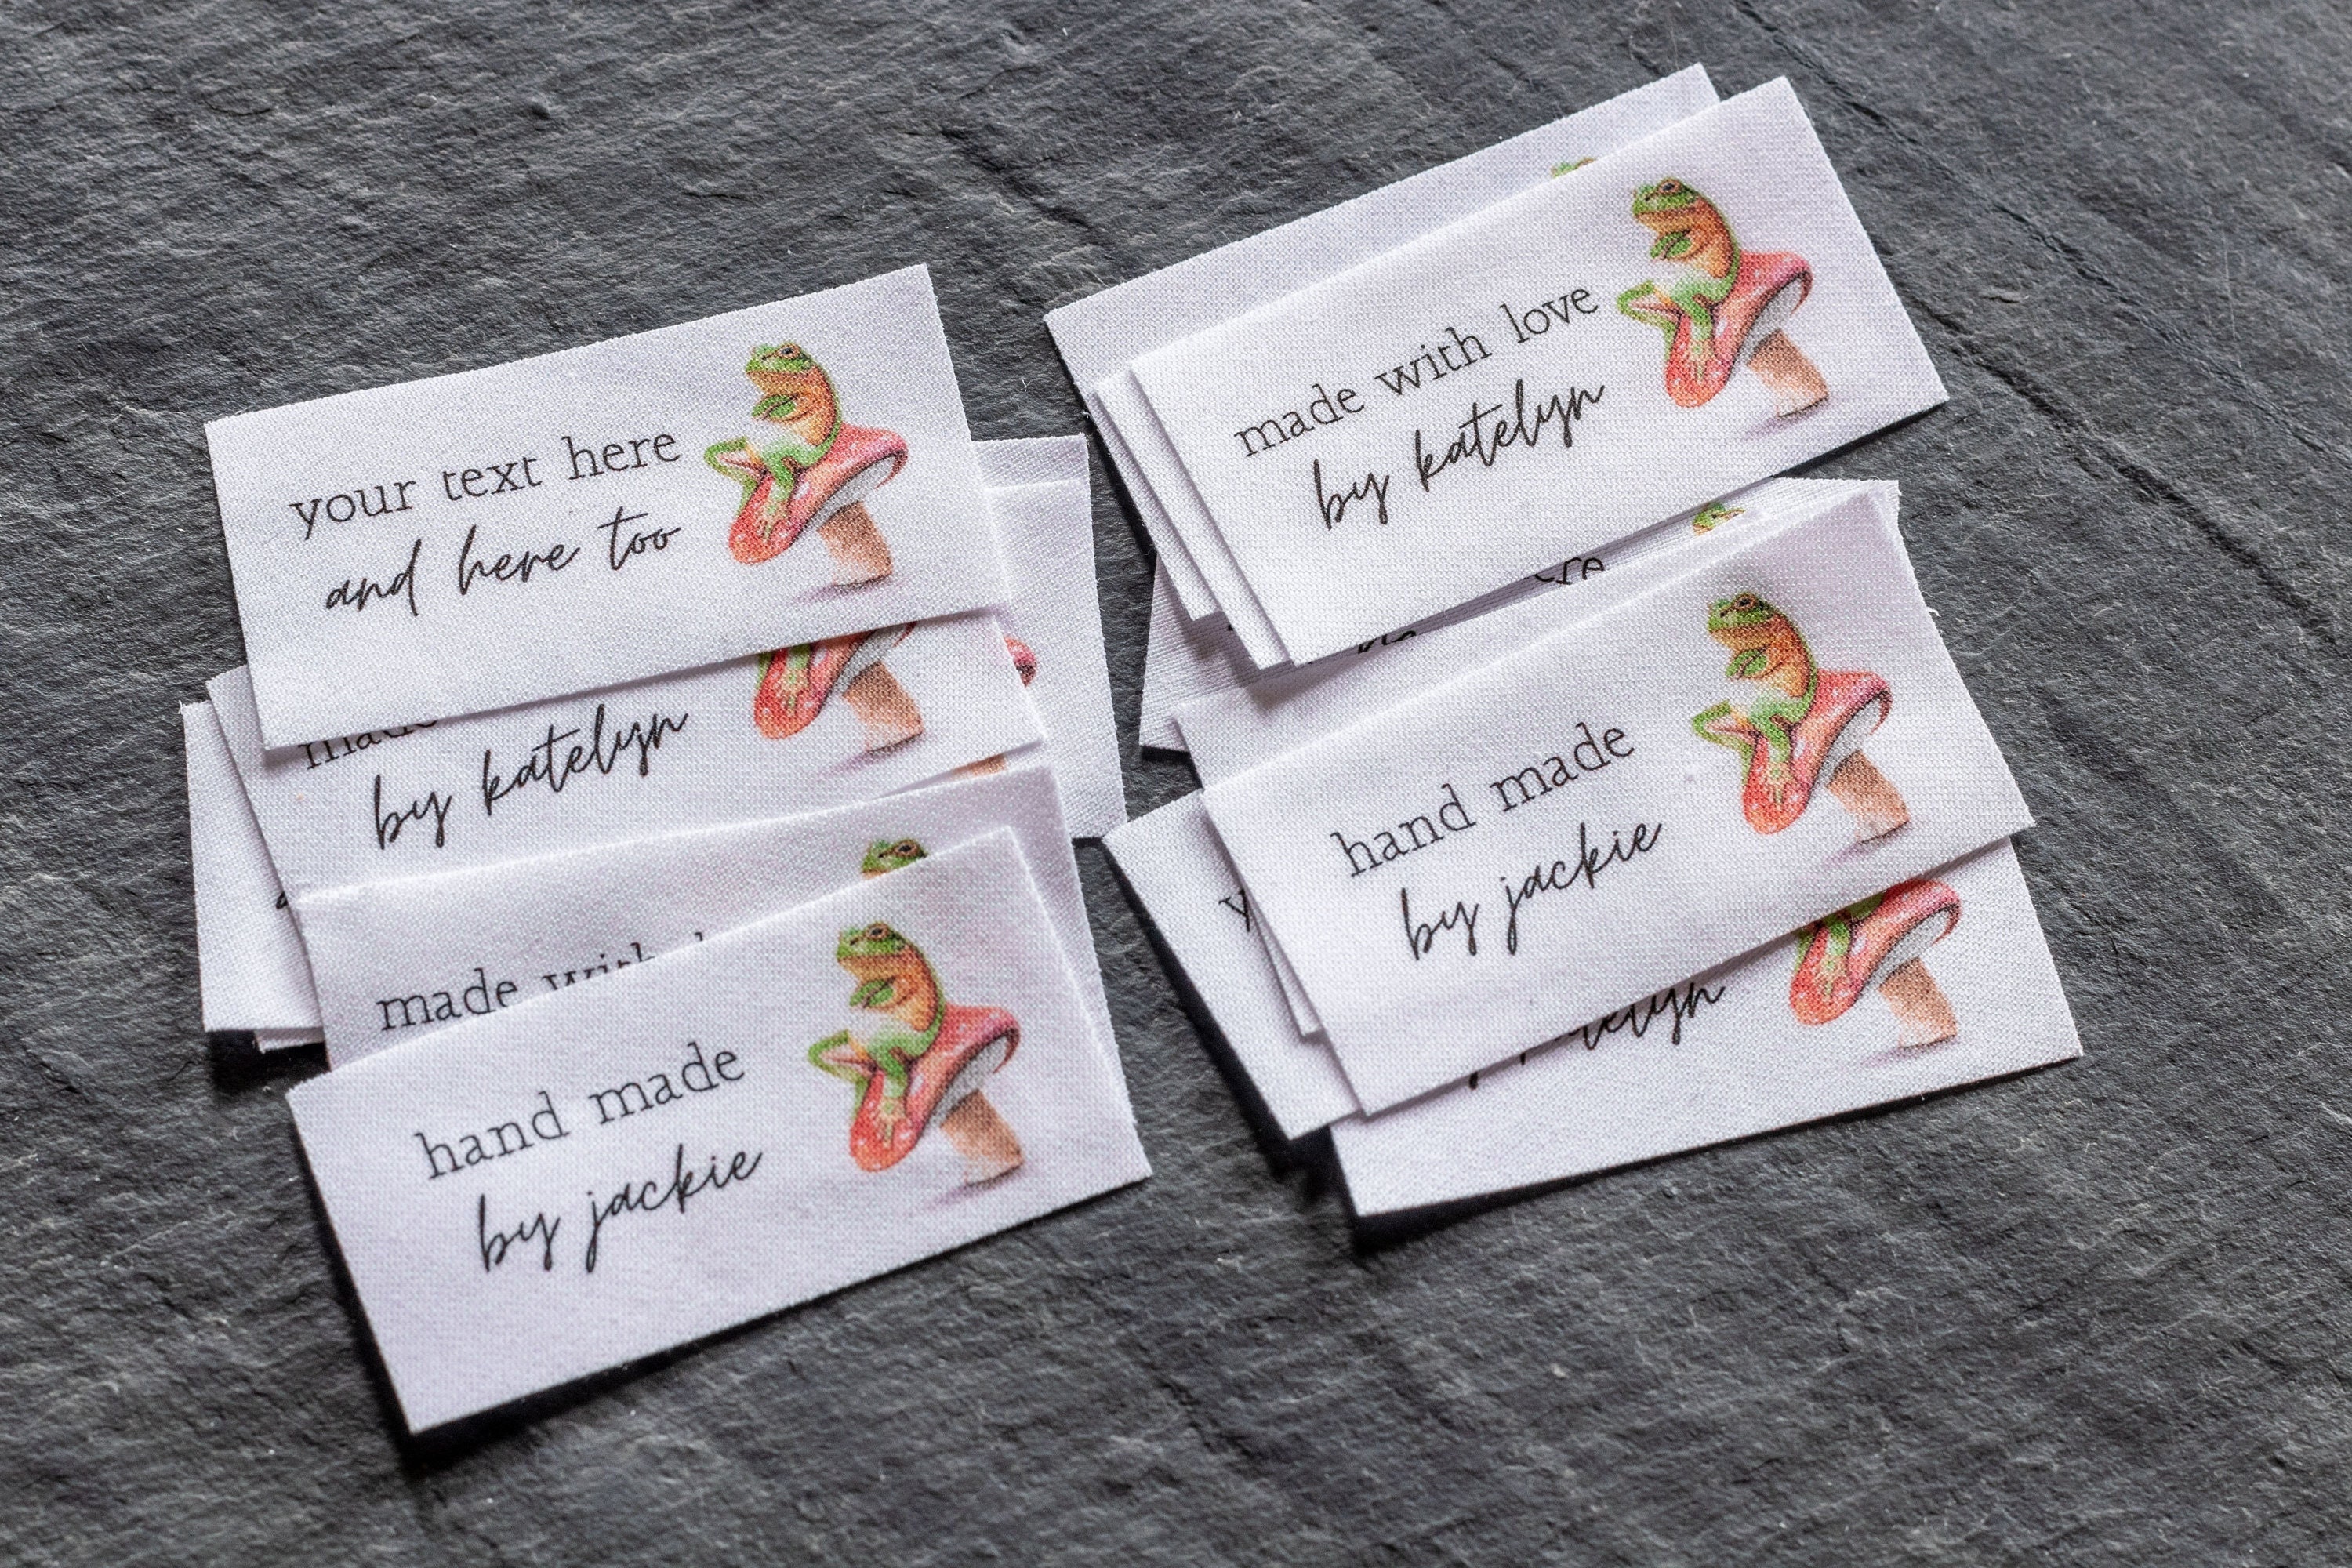 Natural Fabric Labels for Handmade Items Custom Clothing Tags